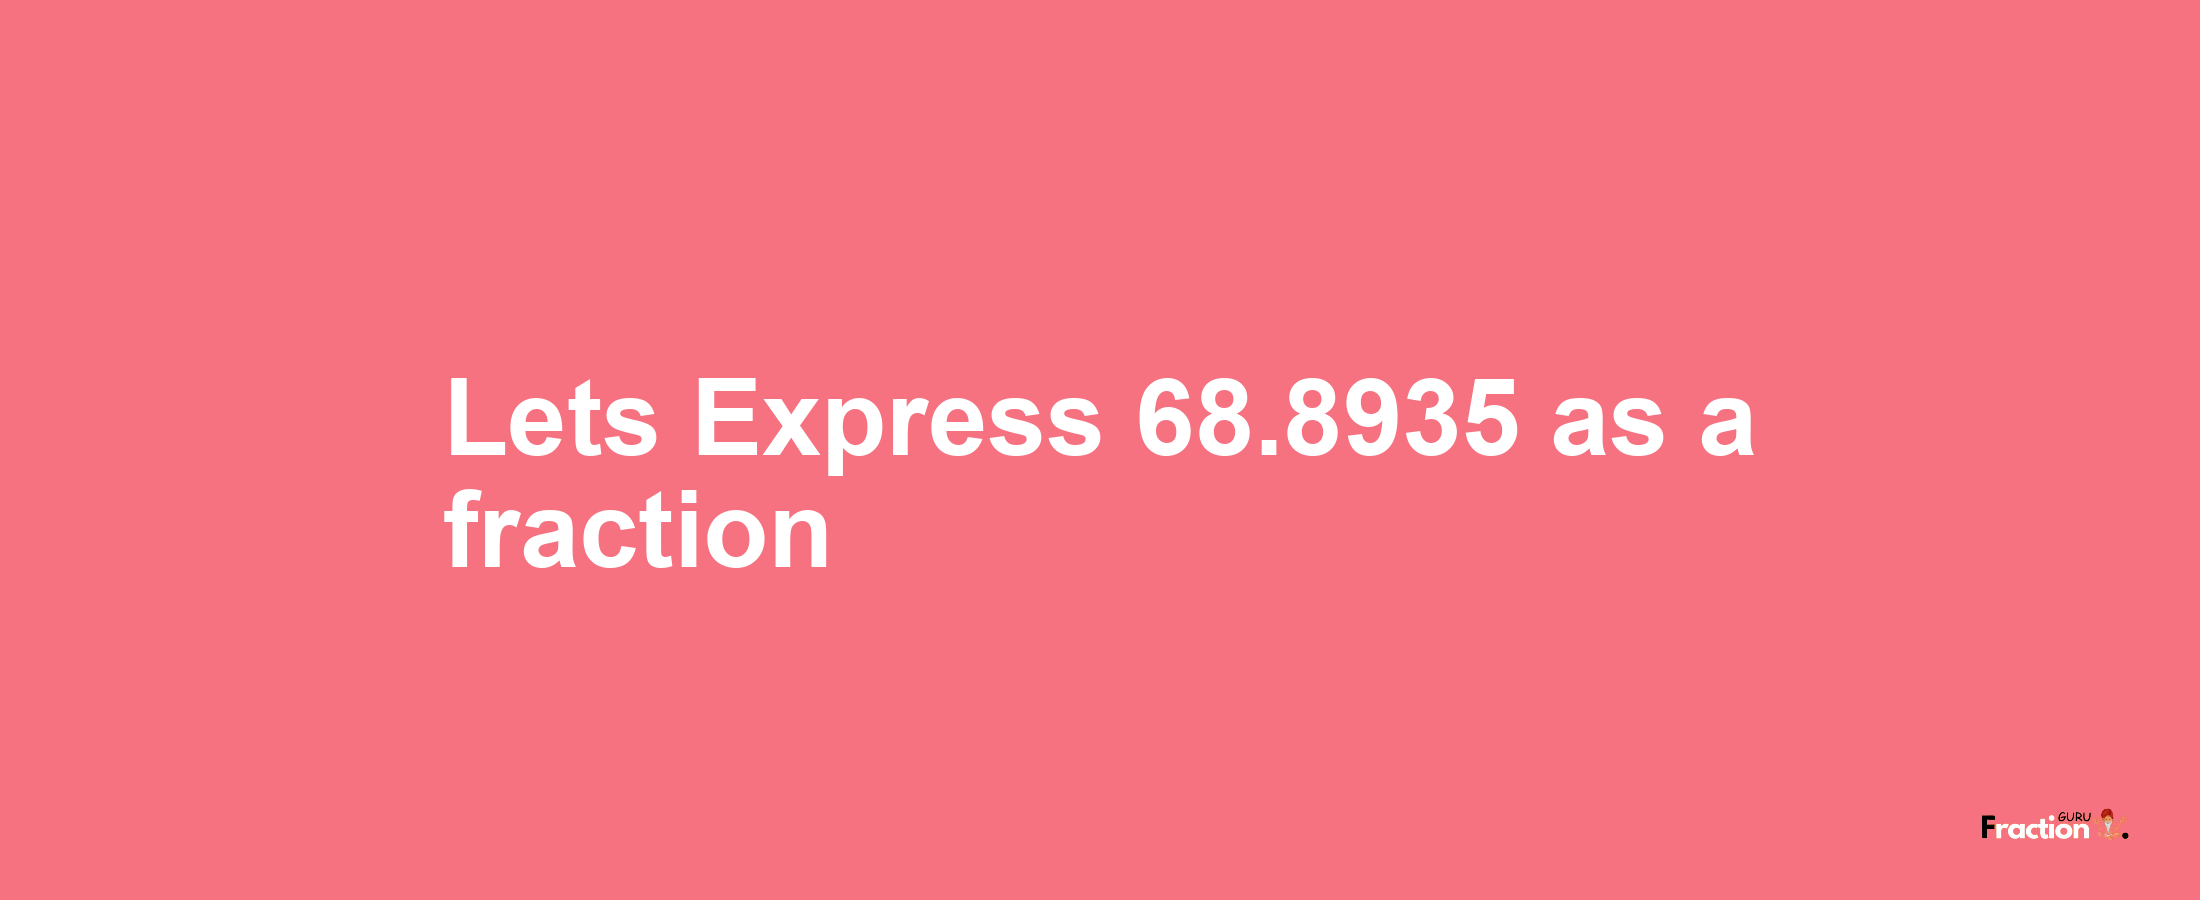 Lets Express 68.8935 as afraction